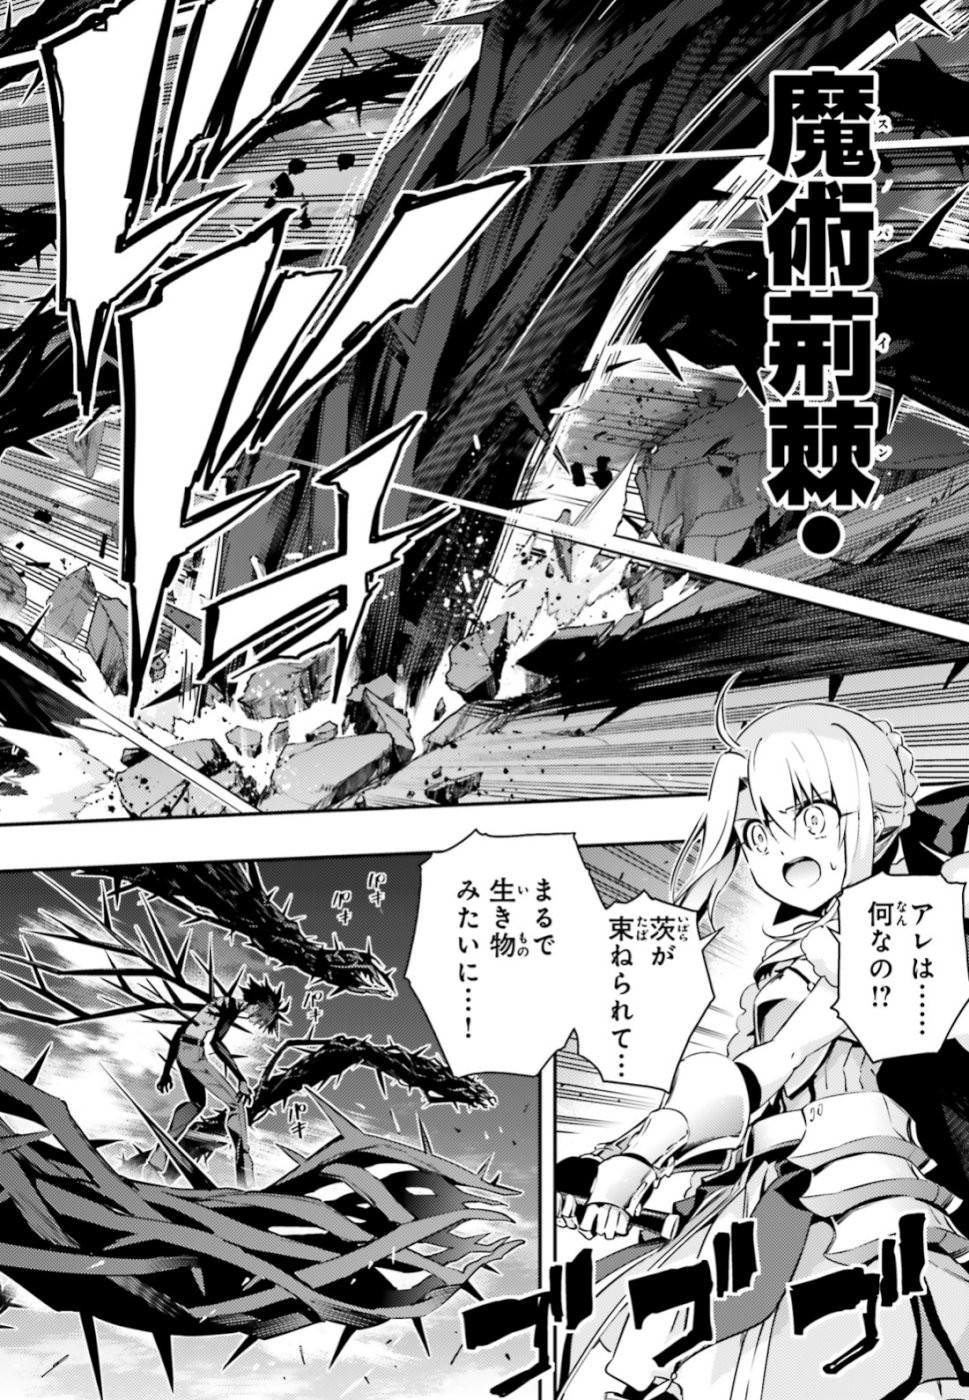 Fate/Kaleid Liner Prisma Illya Drei! - Chapter 55-3 - Page 4